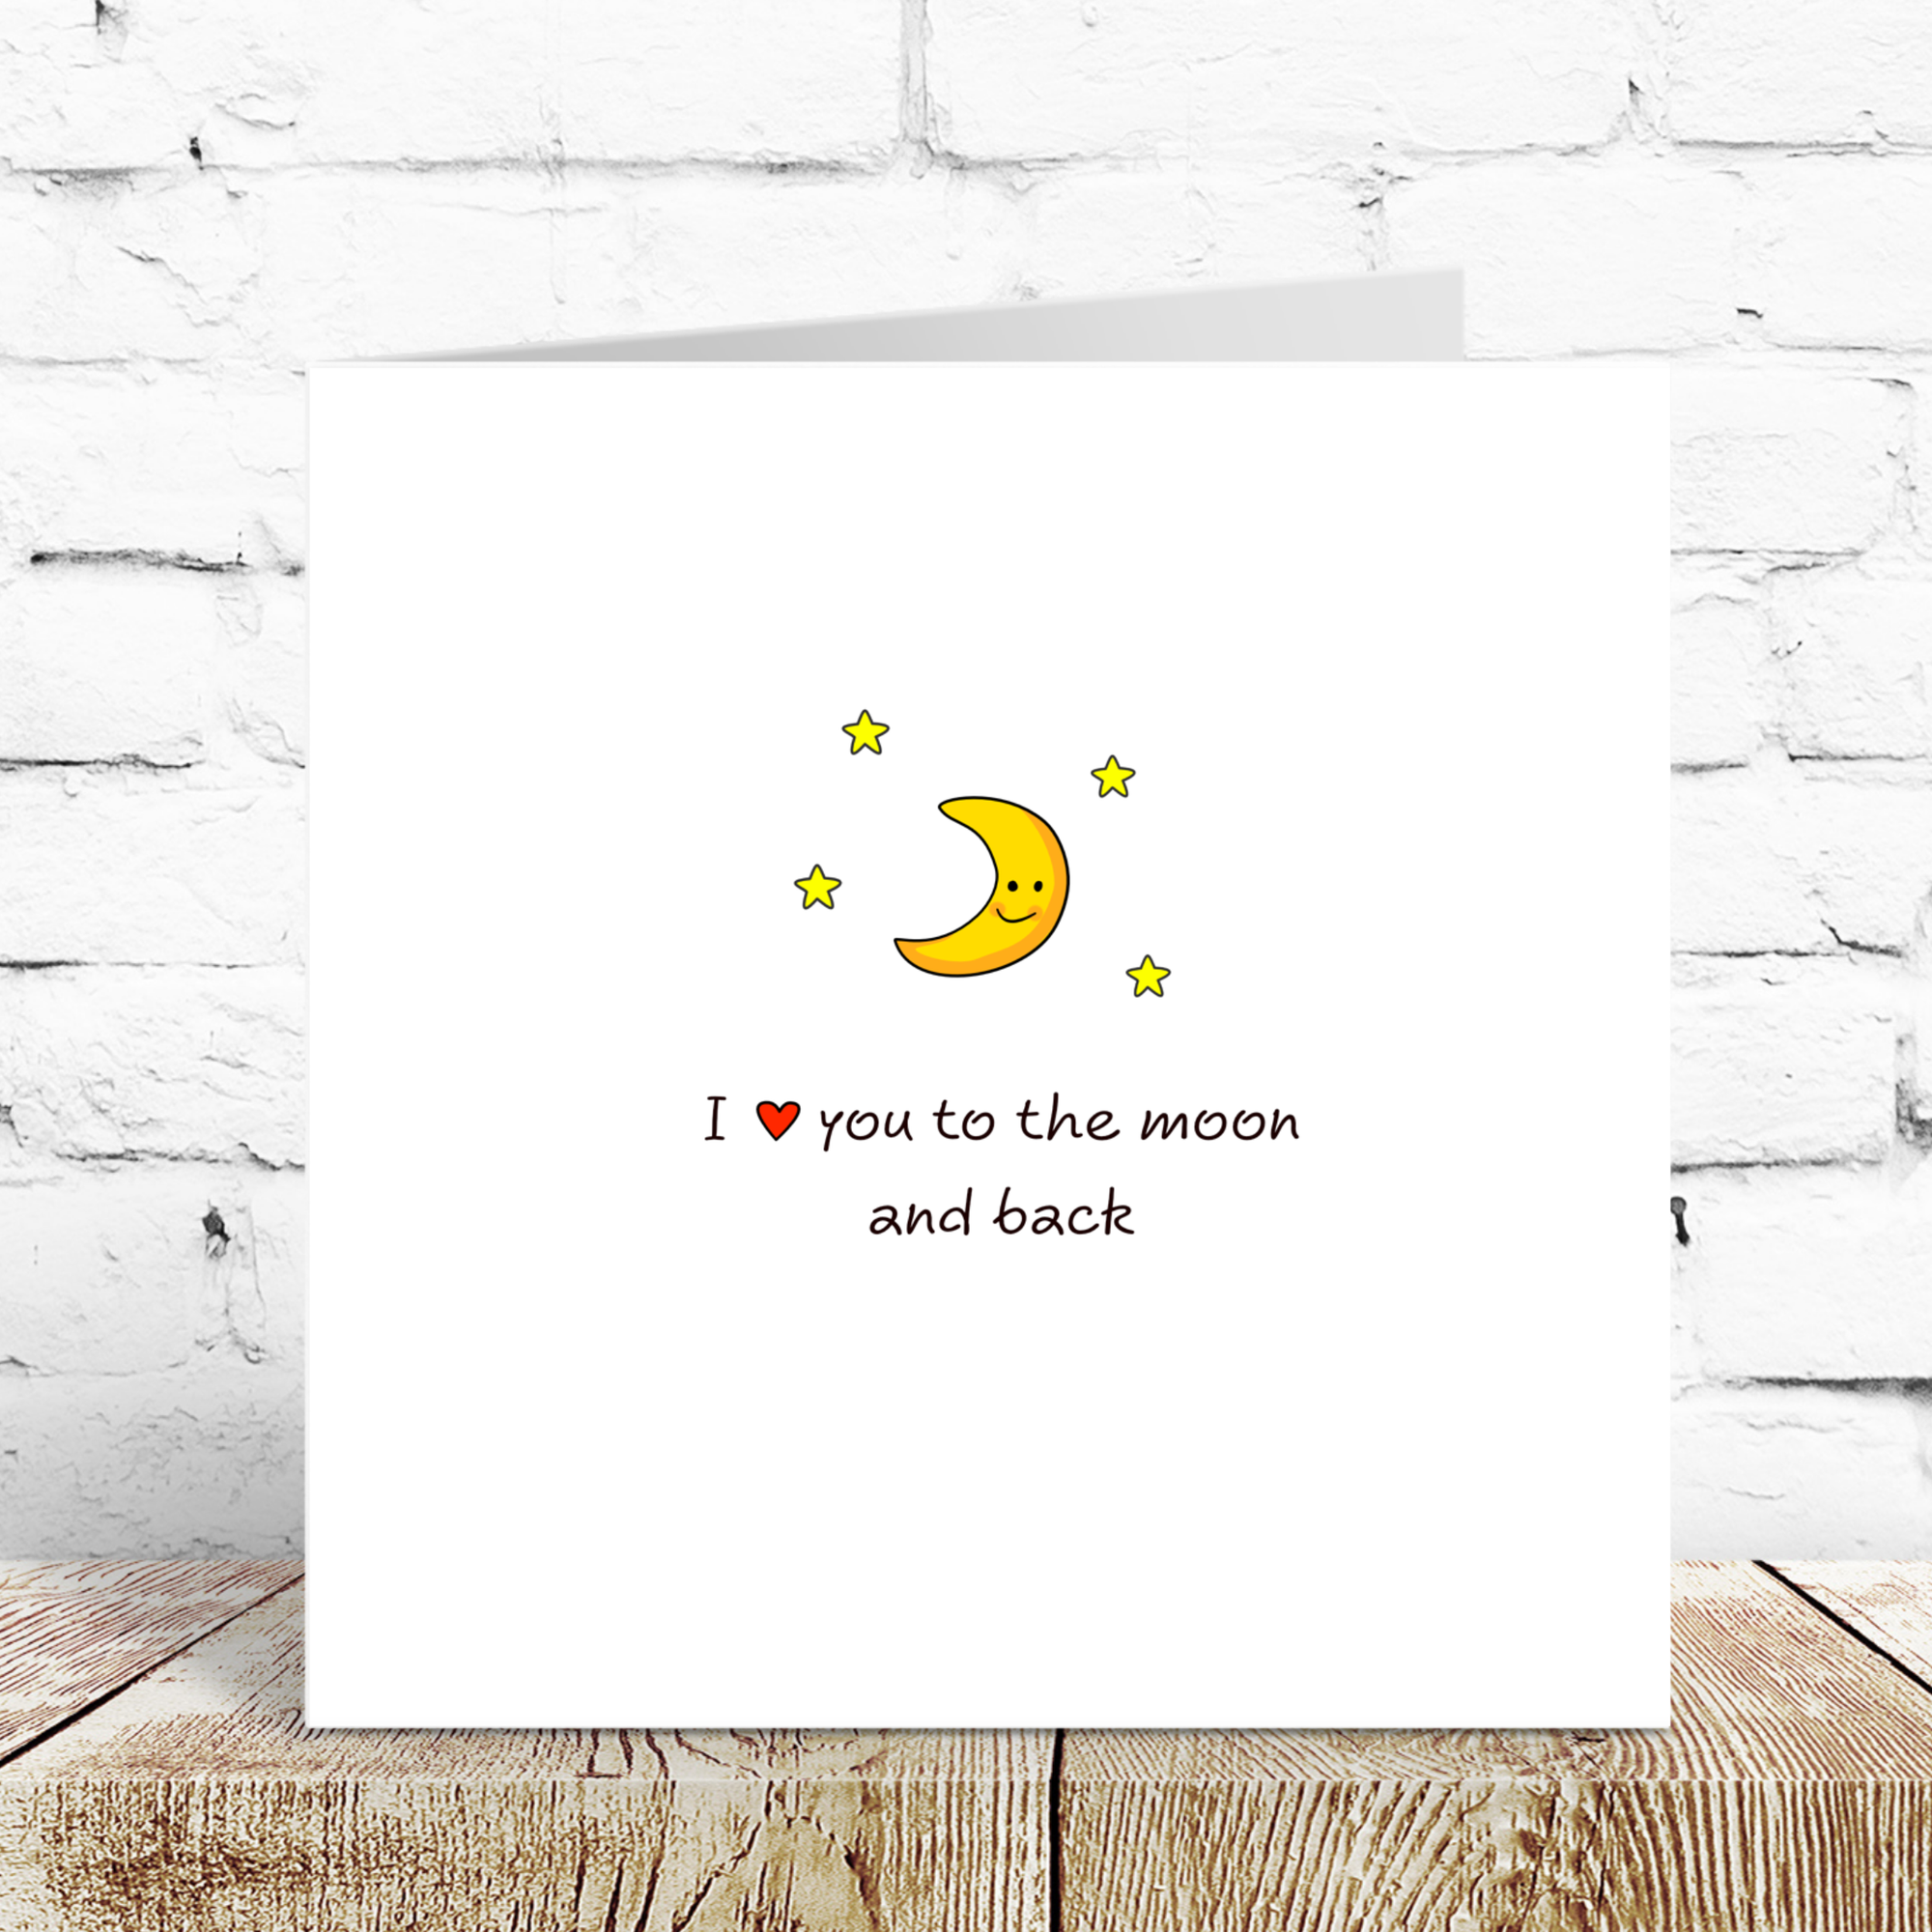 Romantic Anniversary Card / Valentines / Engagement / Wedding Card - I love you to the moon & back - best boyfriend girlfriend wife husband